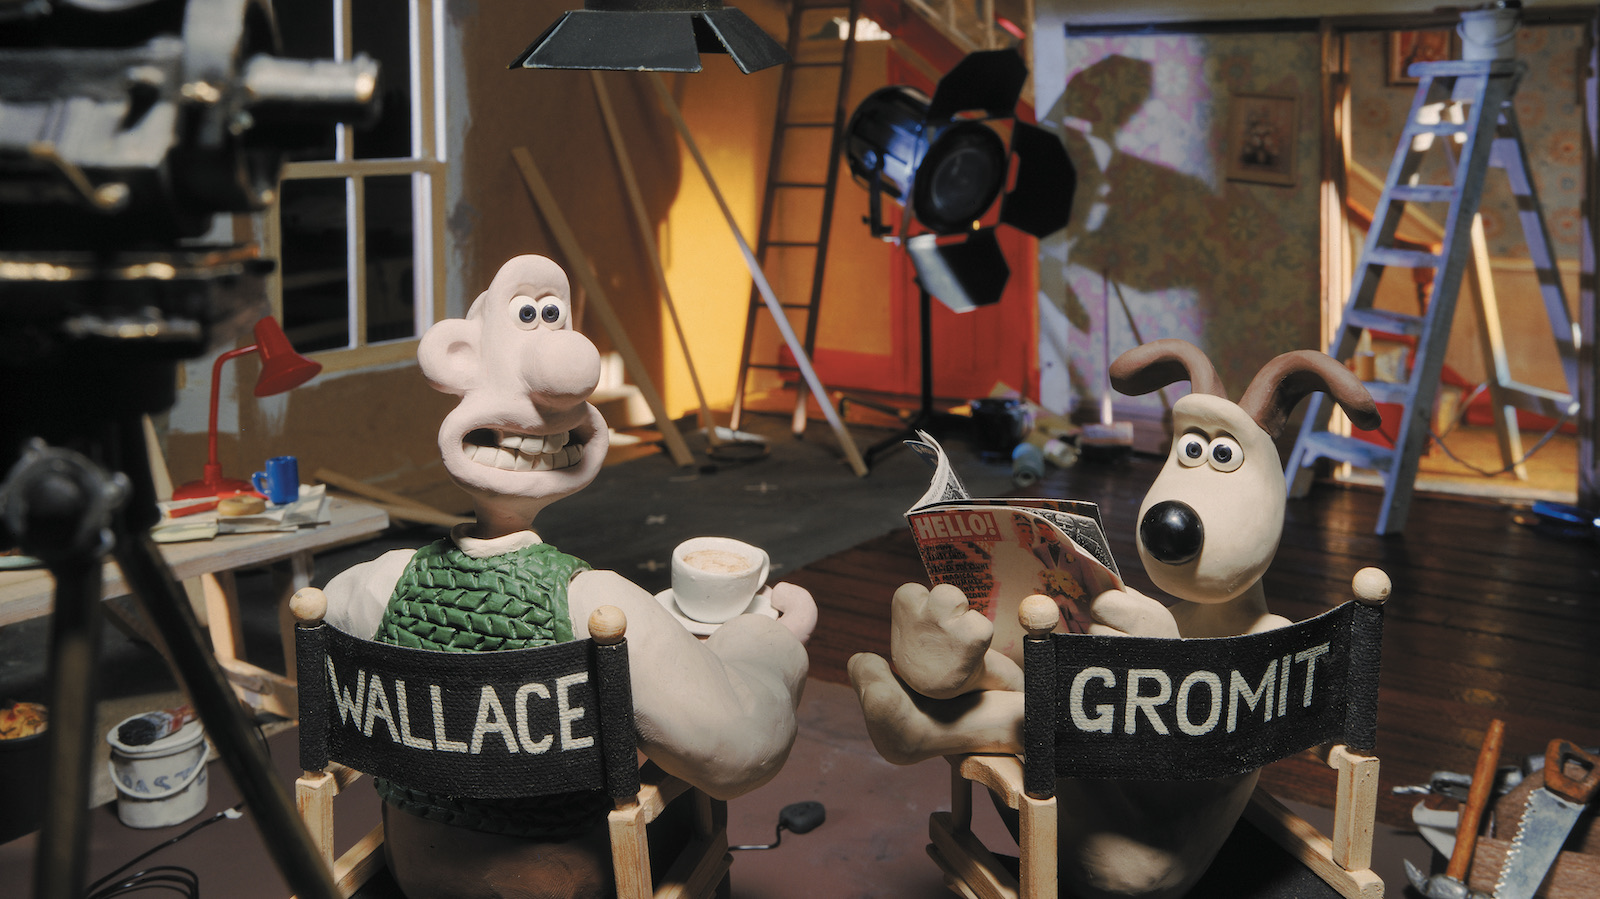 A claymation image of a man and his dog sitting on director's chairs, turning their heads back towards the camera